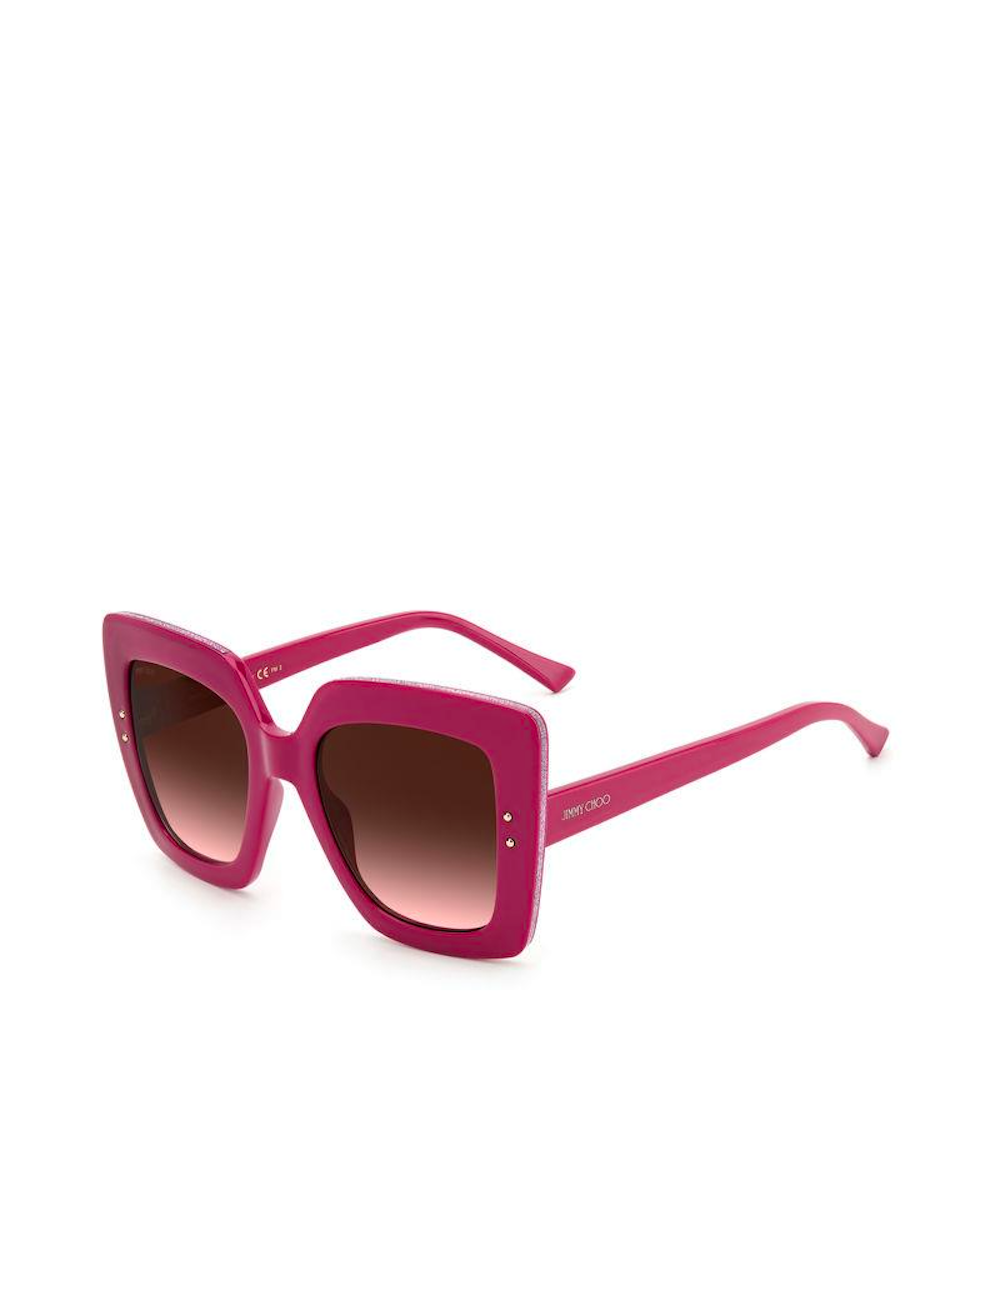 Buy U.I STATION Oversized Mirrored Cat Eye Rimless Women's Sunglasses with  Sunglass Case (Pink) at Amazon.in